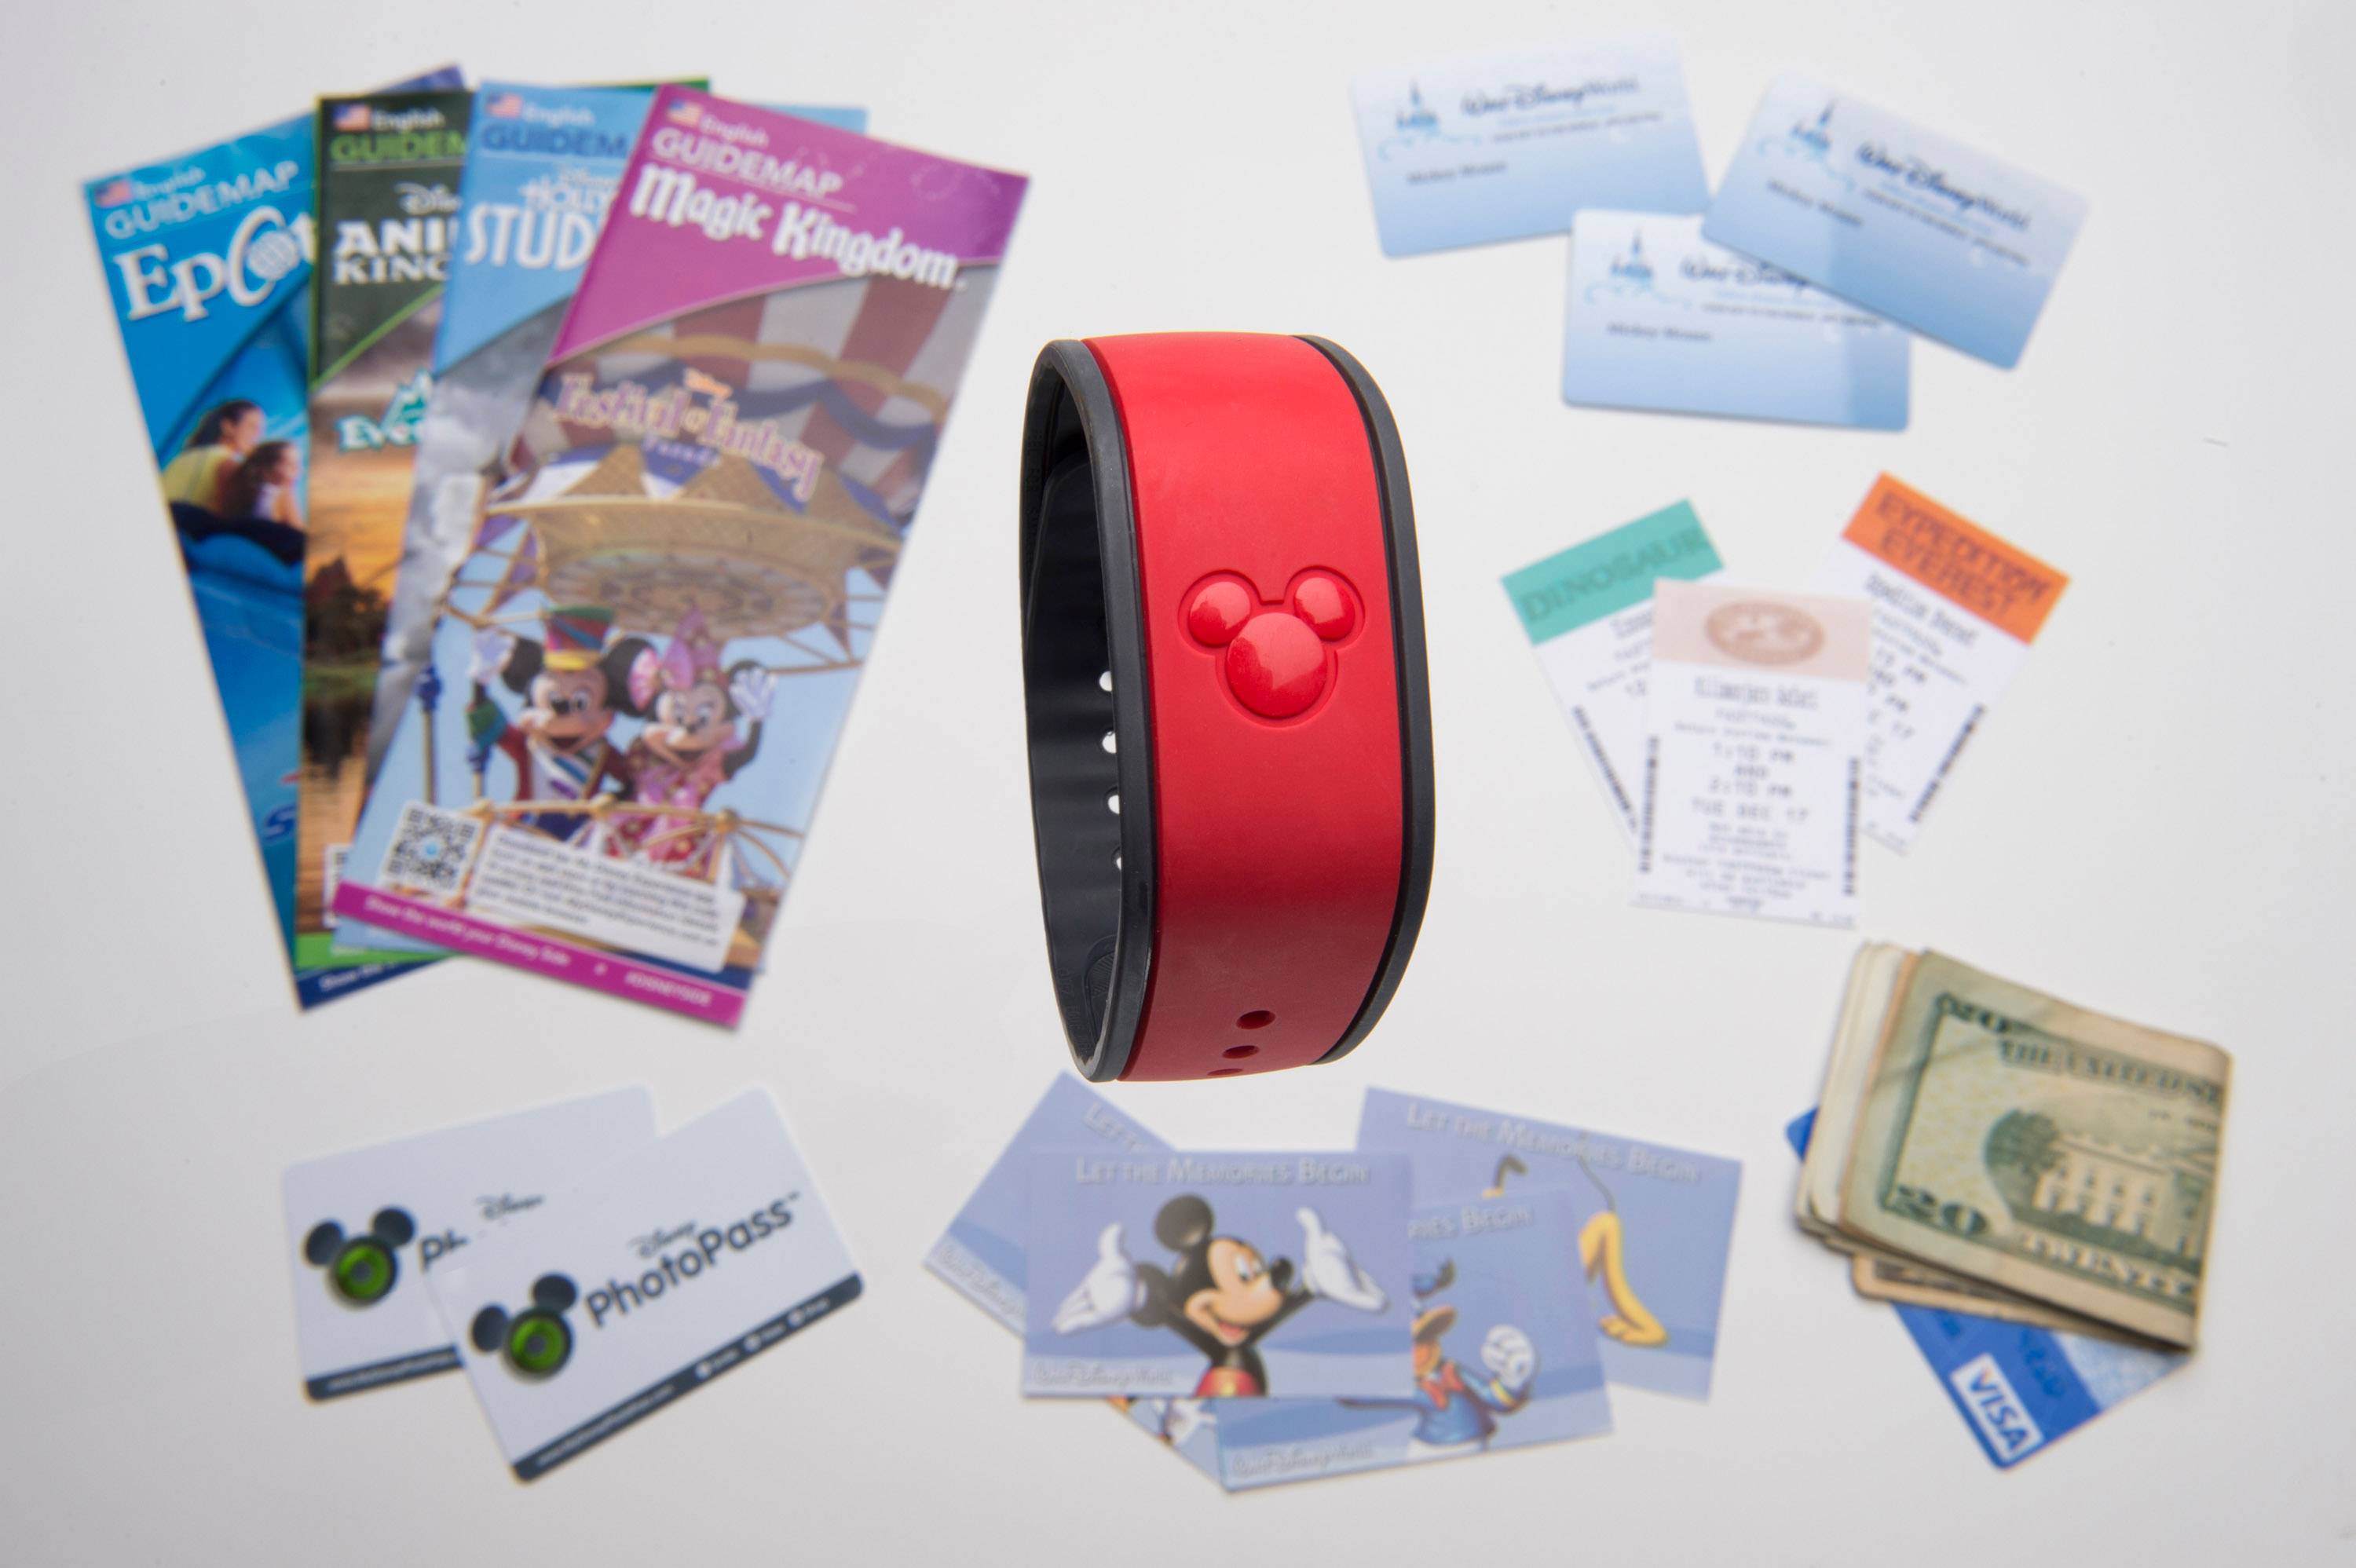 New Disney PhotoPass product - Memory Maker One Day